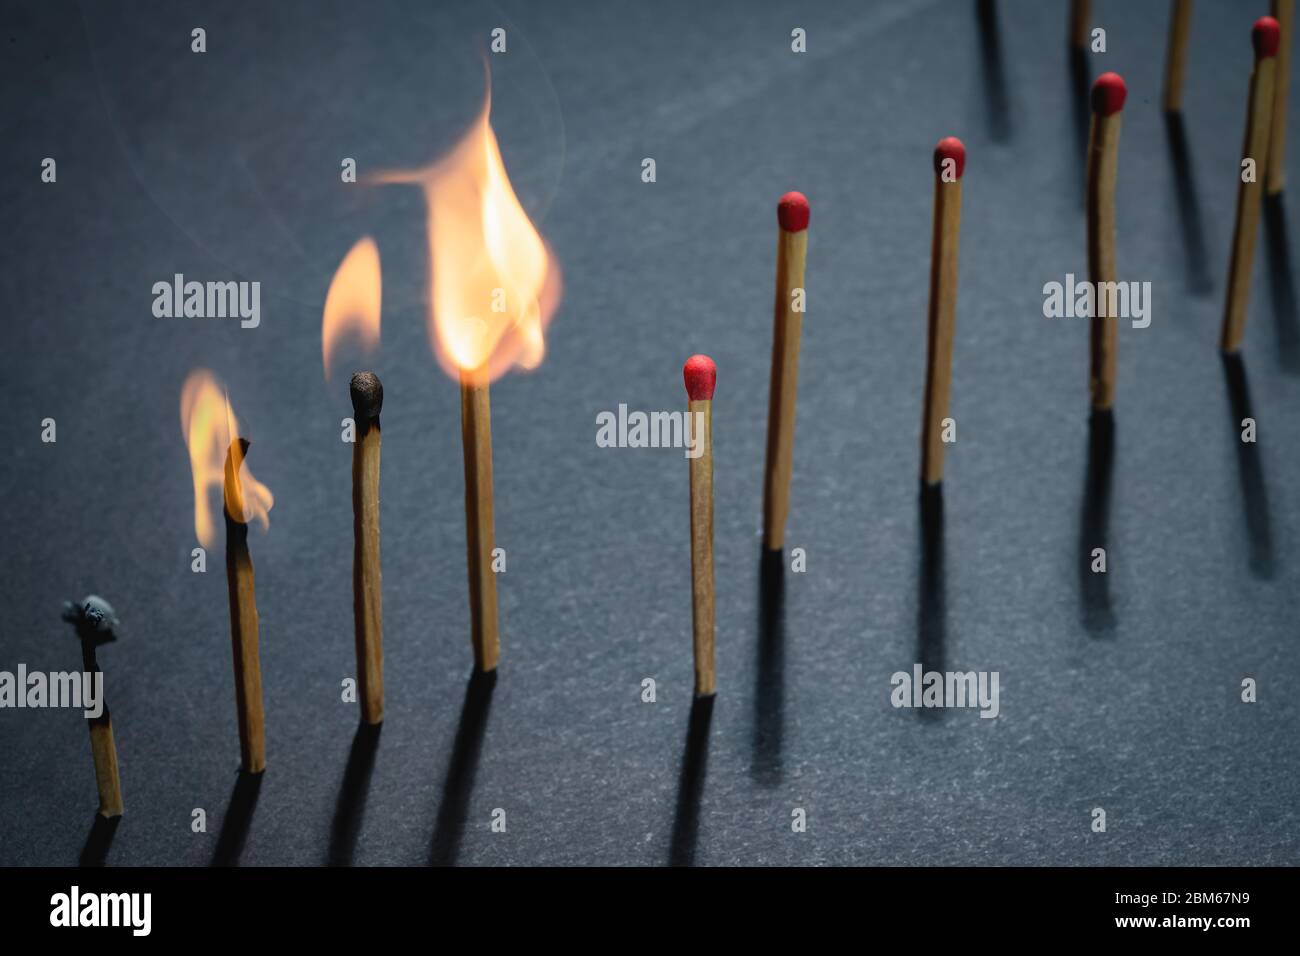 Match sticks burn, one piece prevents the fire from spreading - the concept of how to stop the covid-19 coronavirus from spreading: stay at home Stock Photo